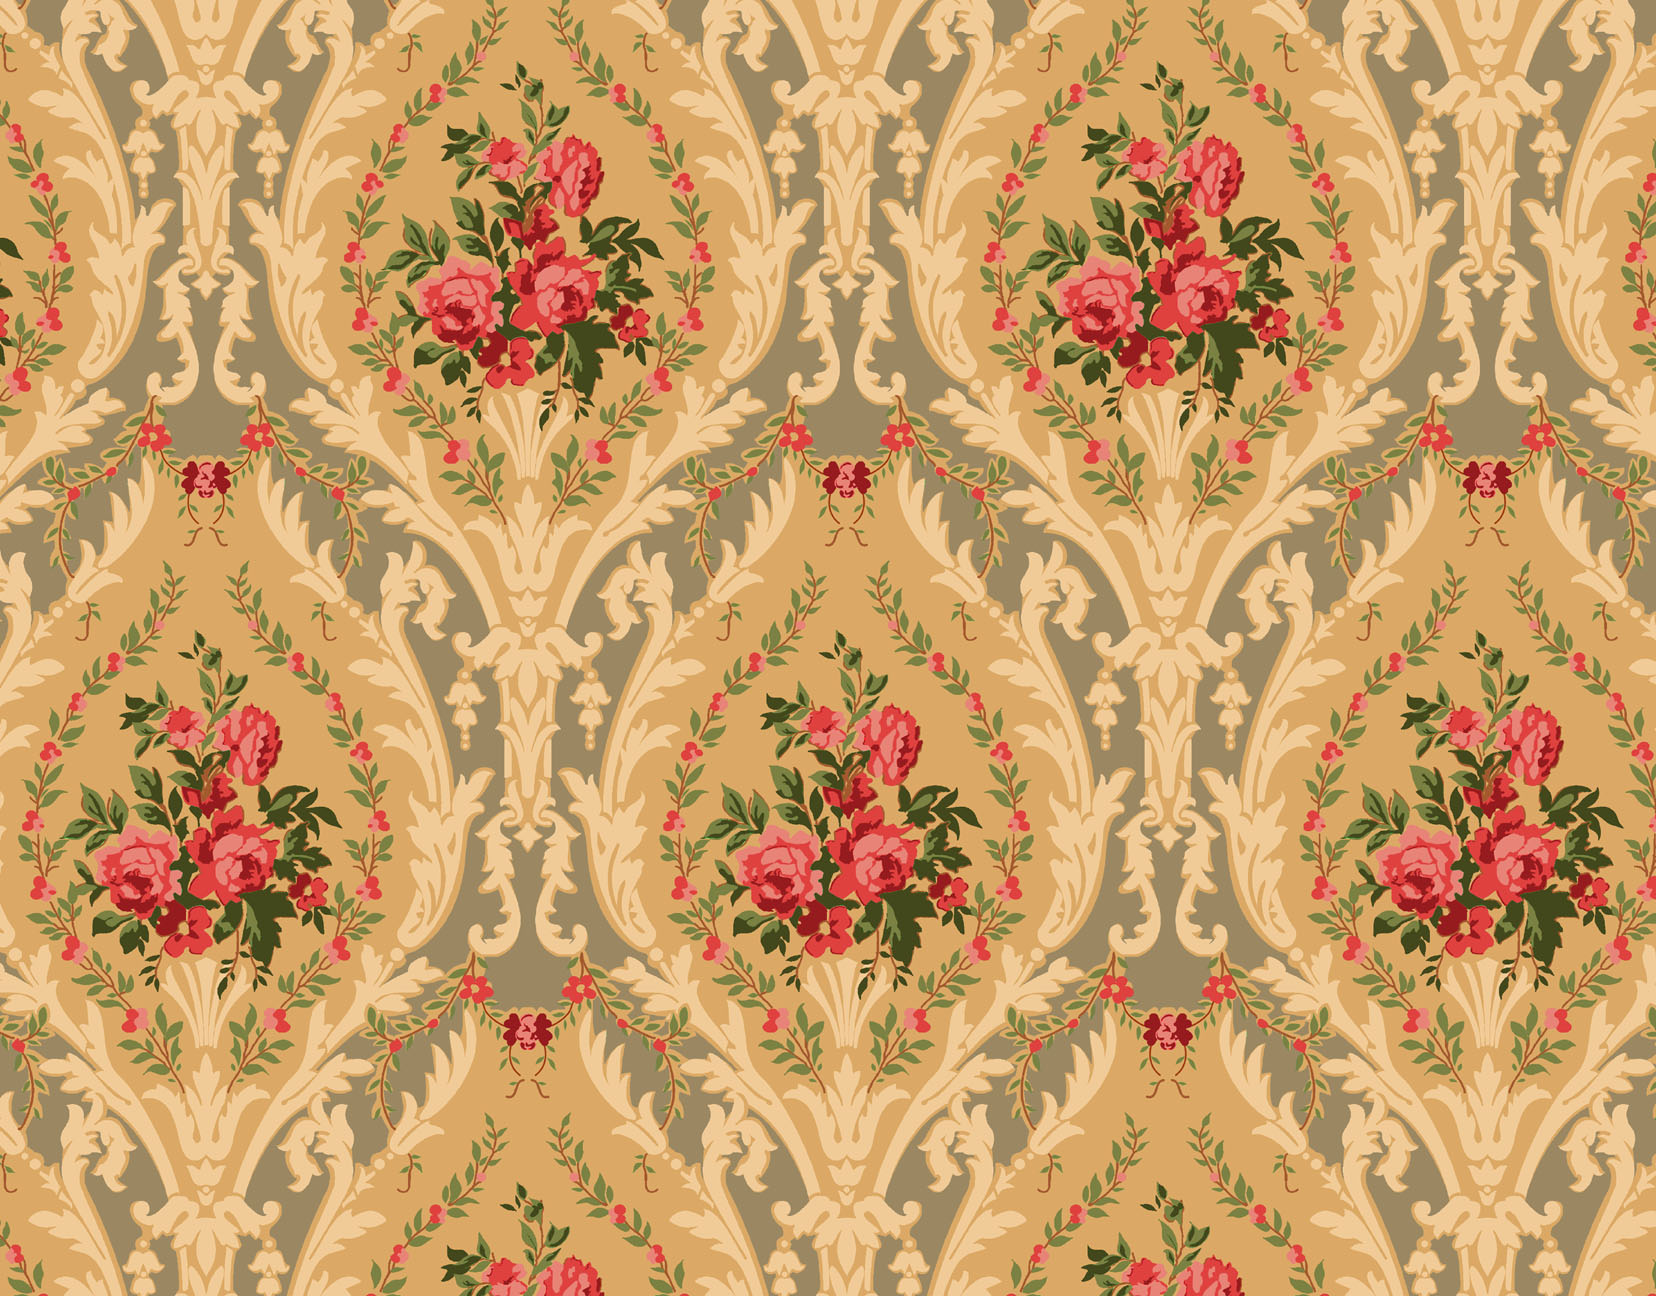 Victorian Early Arts and Crafts   Historic Wallpapers   Victorian Arts